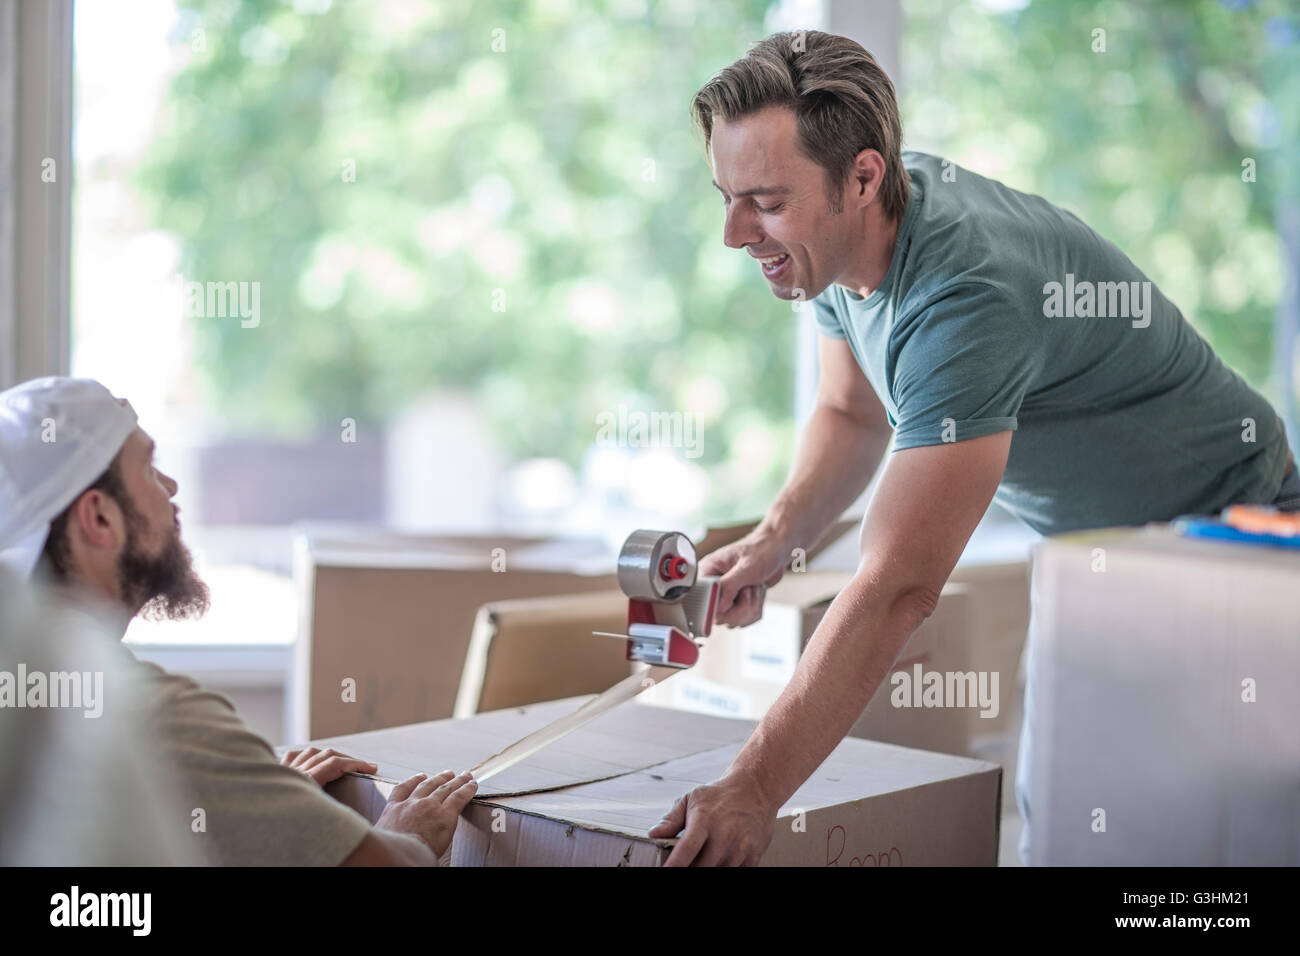 Moving house: two men taping up cardboard box Stock Photo